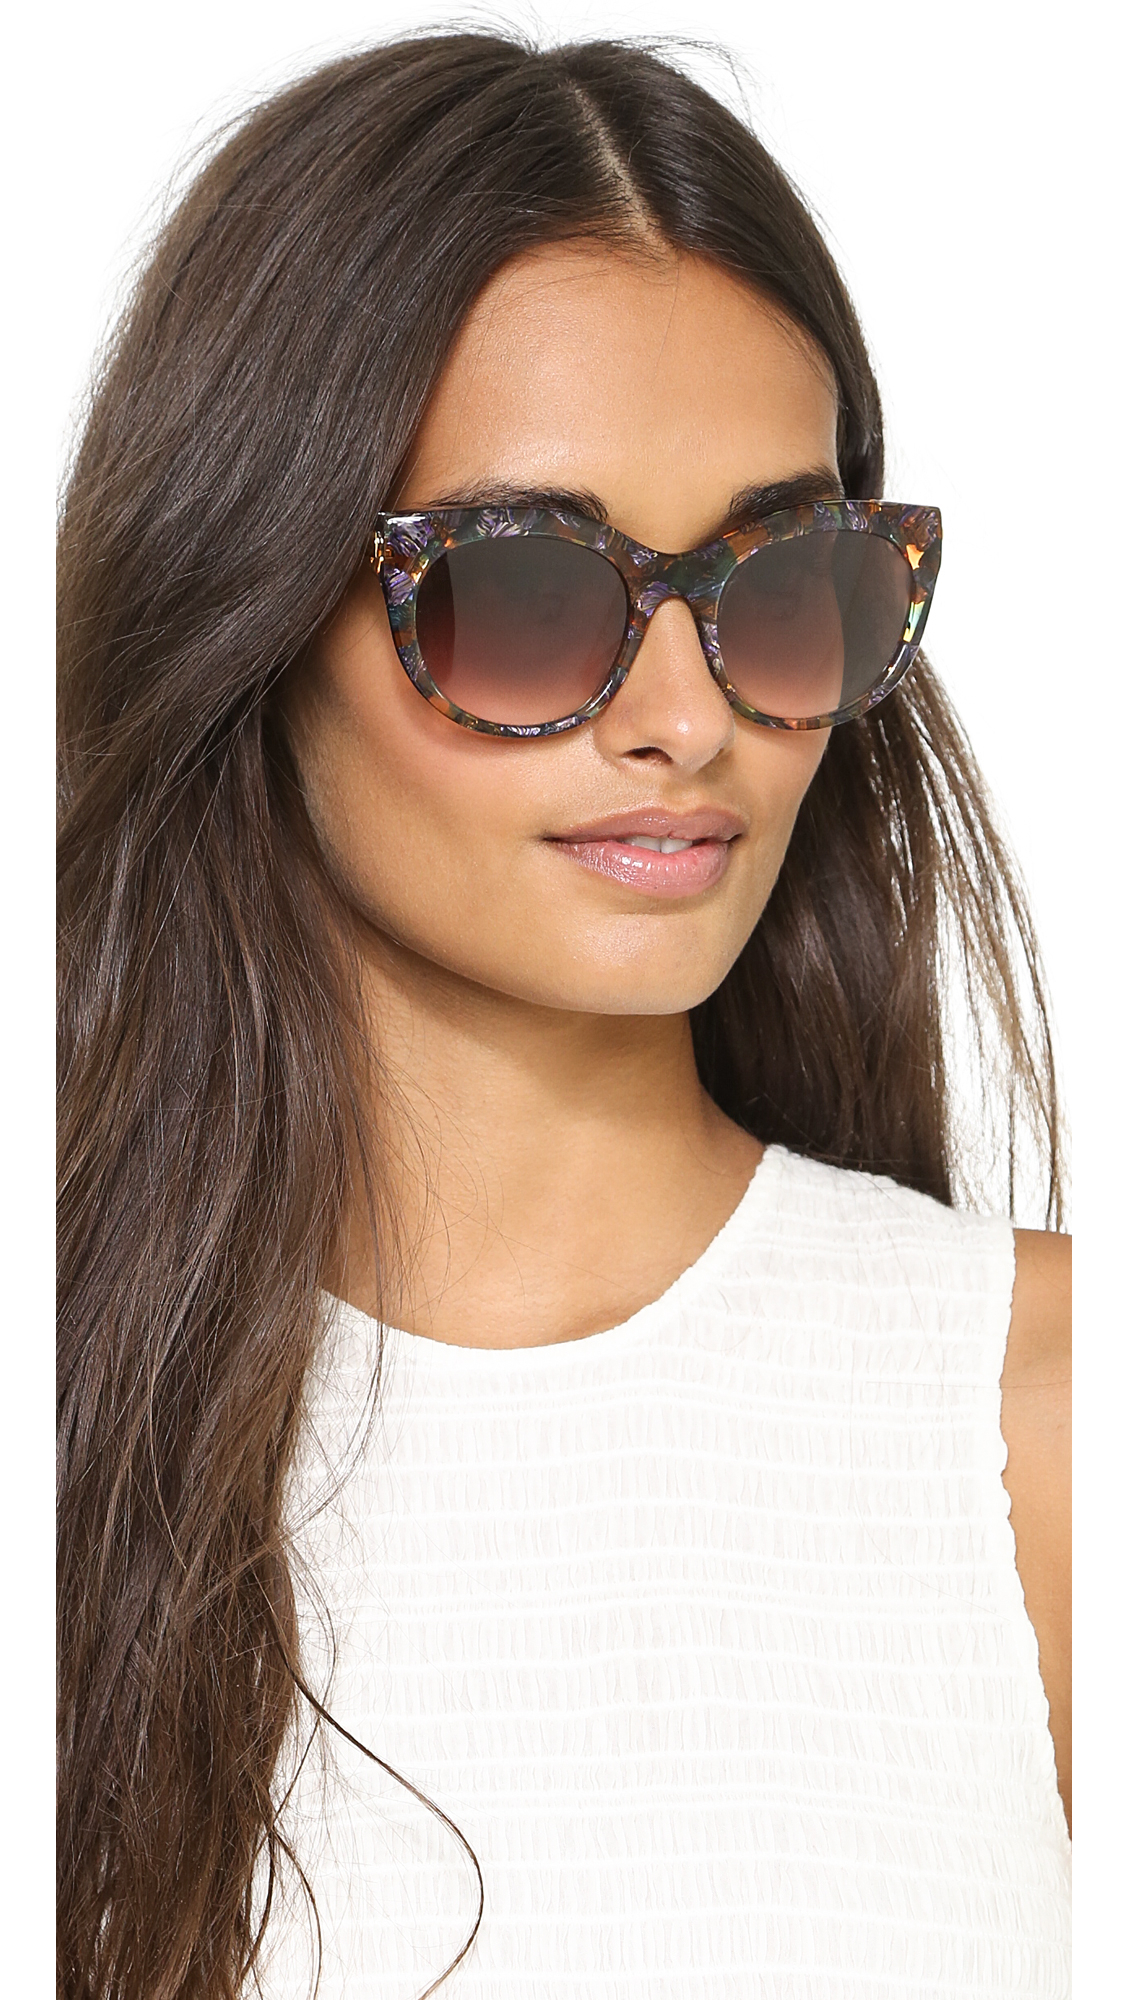 Lyst - Thierry Lasry Glitzy Sunglasses Multibrown Gradient in Brown